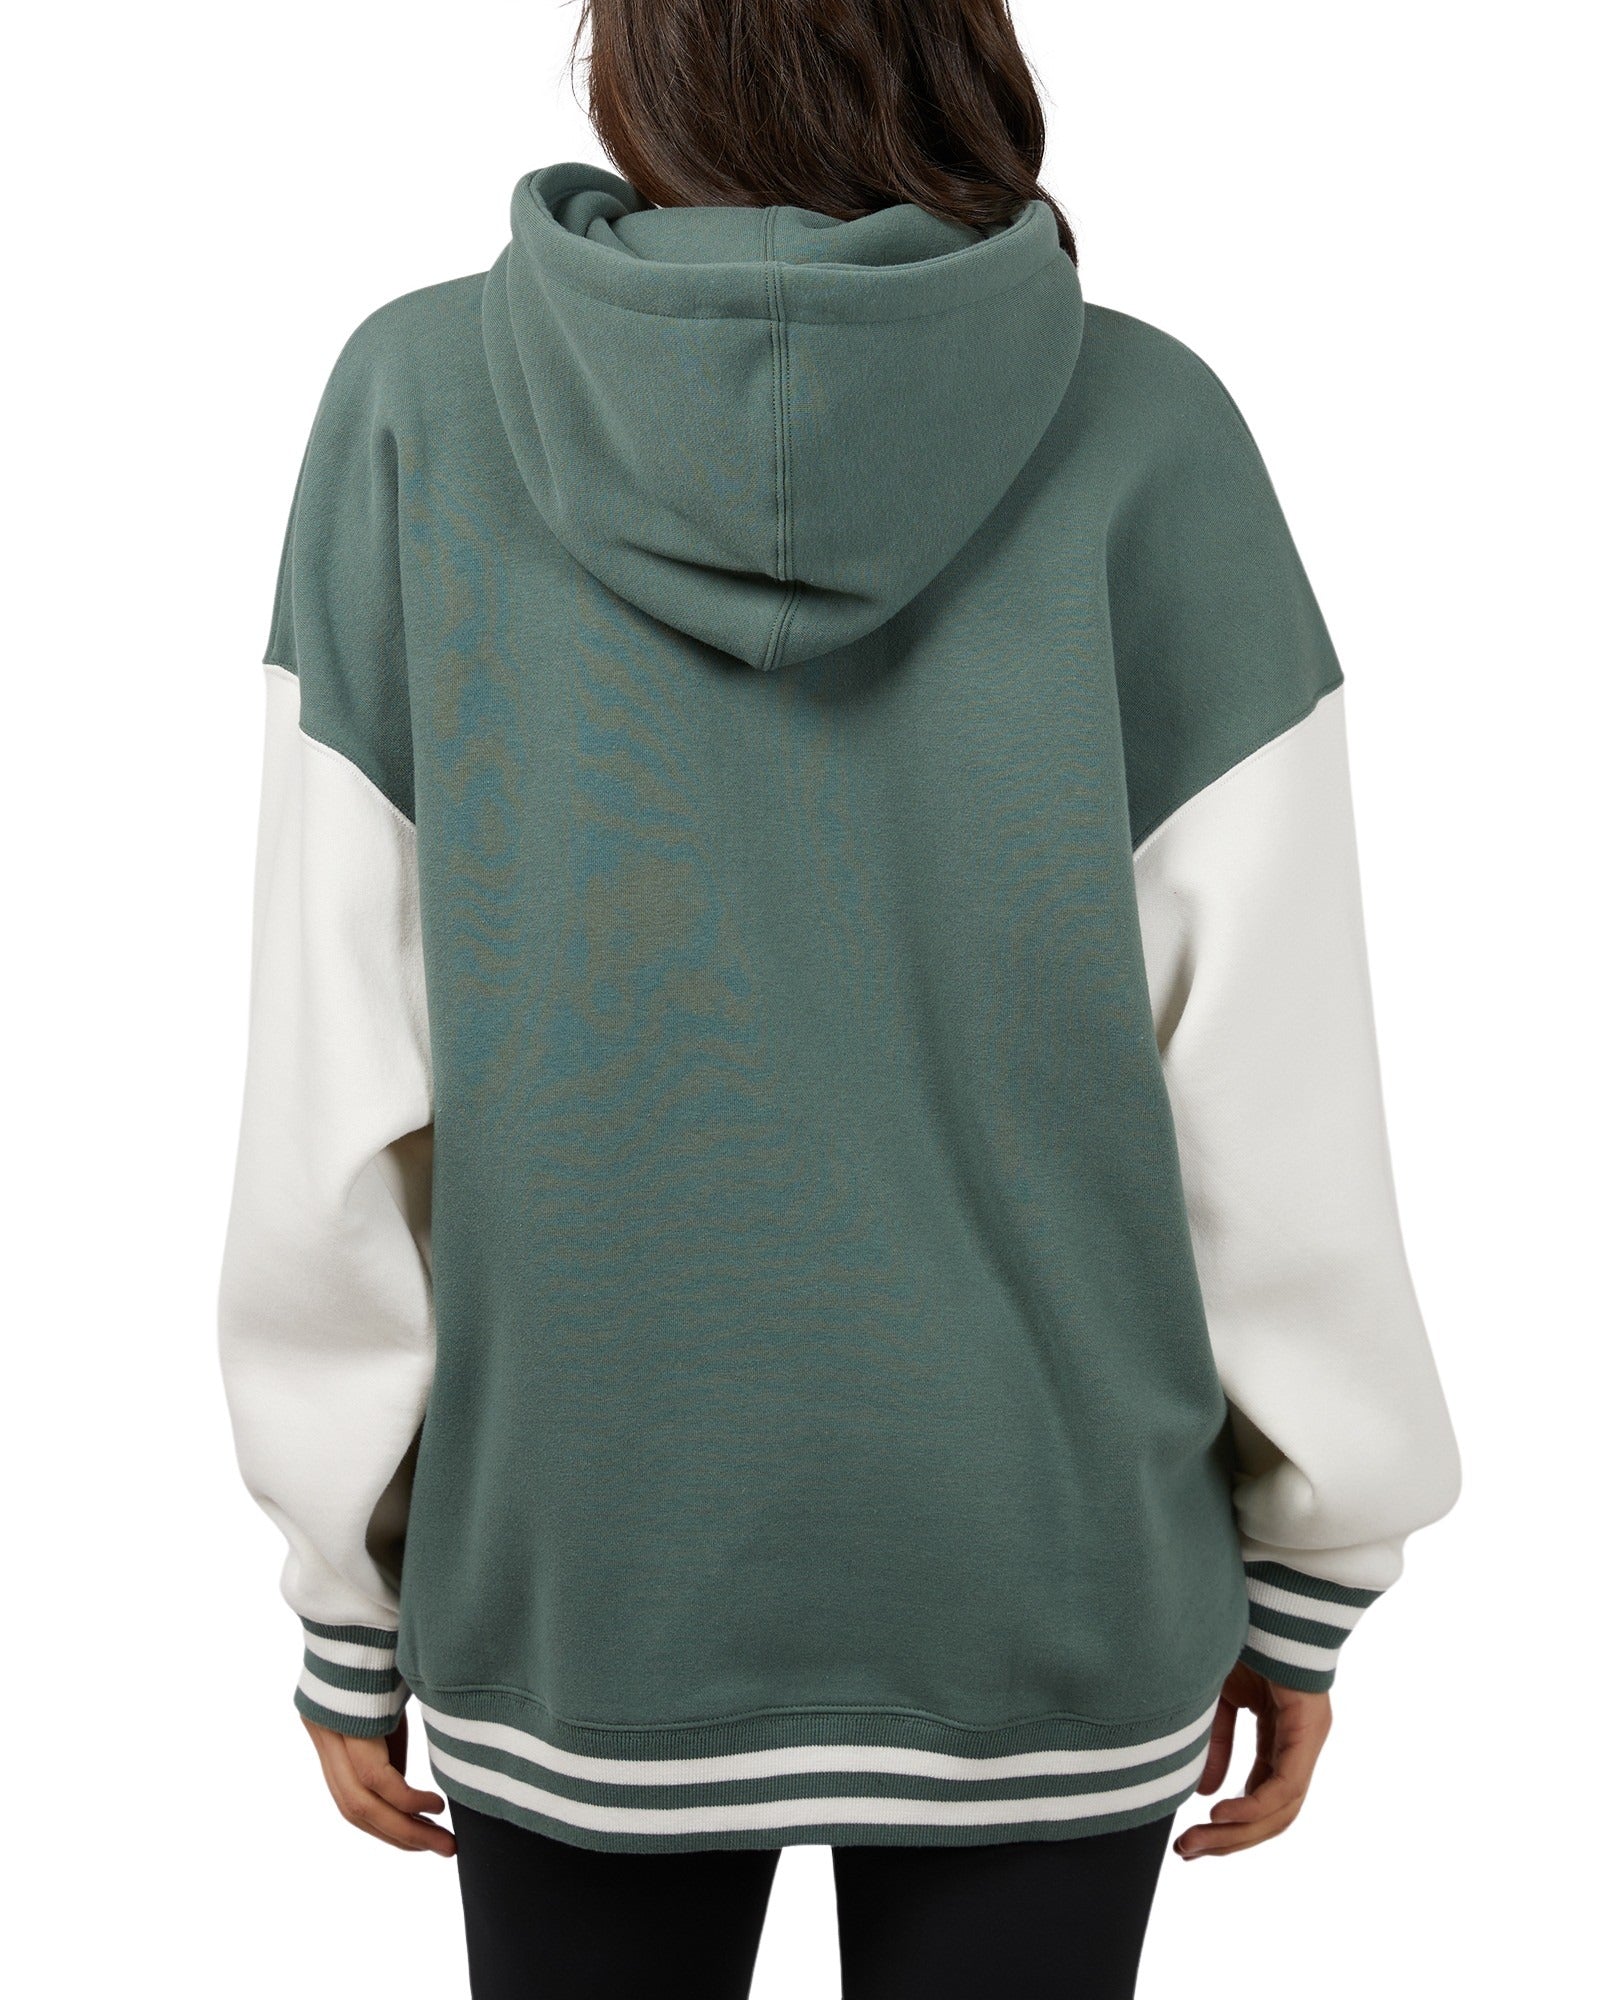 All About Eve - AAE Active National Contrast Hoody - Green